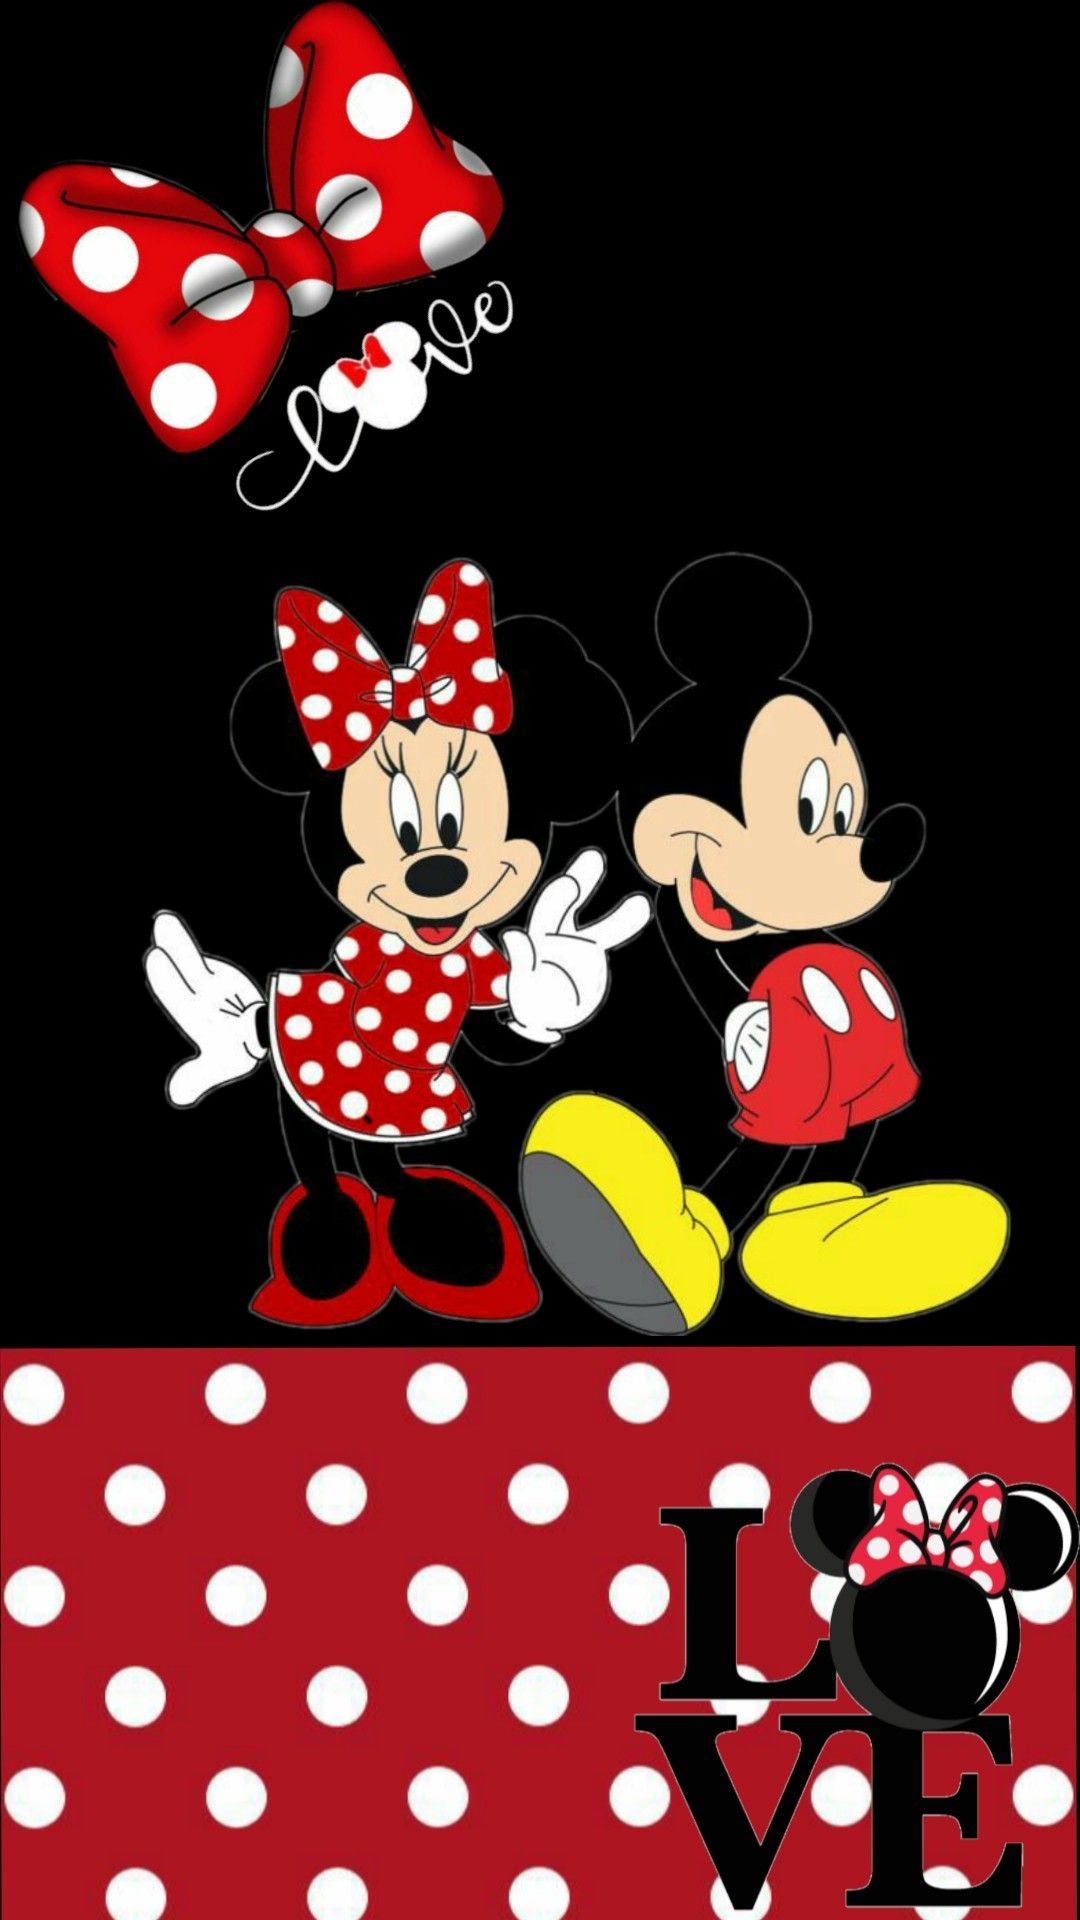 Polka Dot Minnie Mouse Wallpaper. Mickey mouse wallpaper, Minnie mouse background, Mickey mouse art